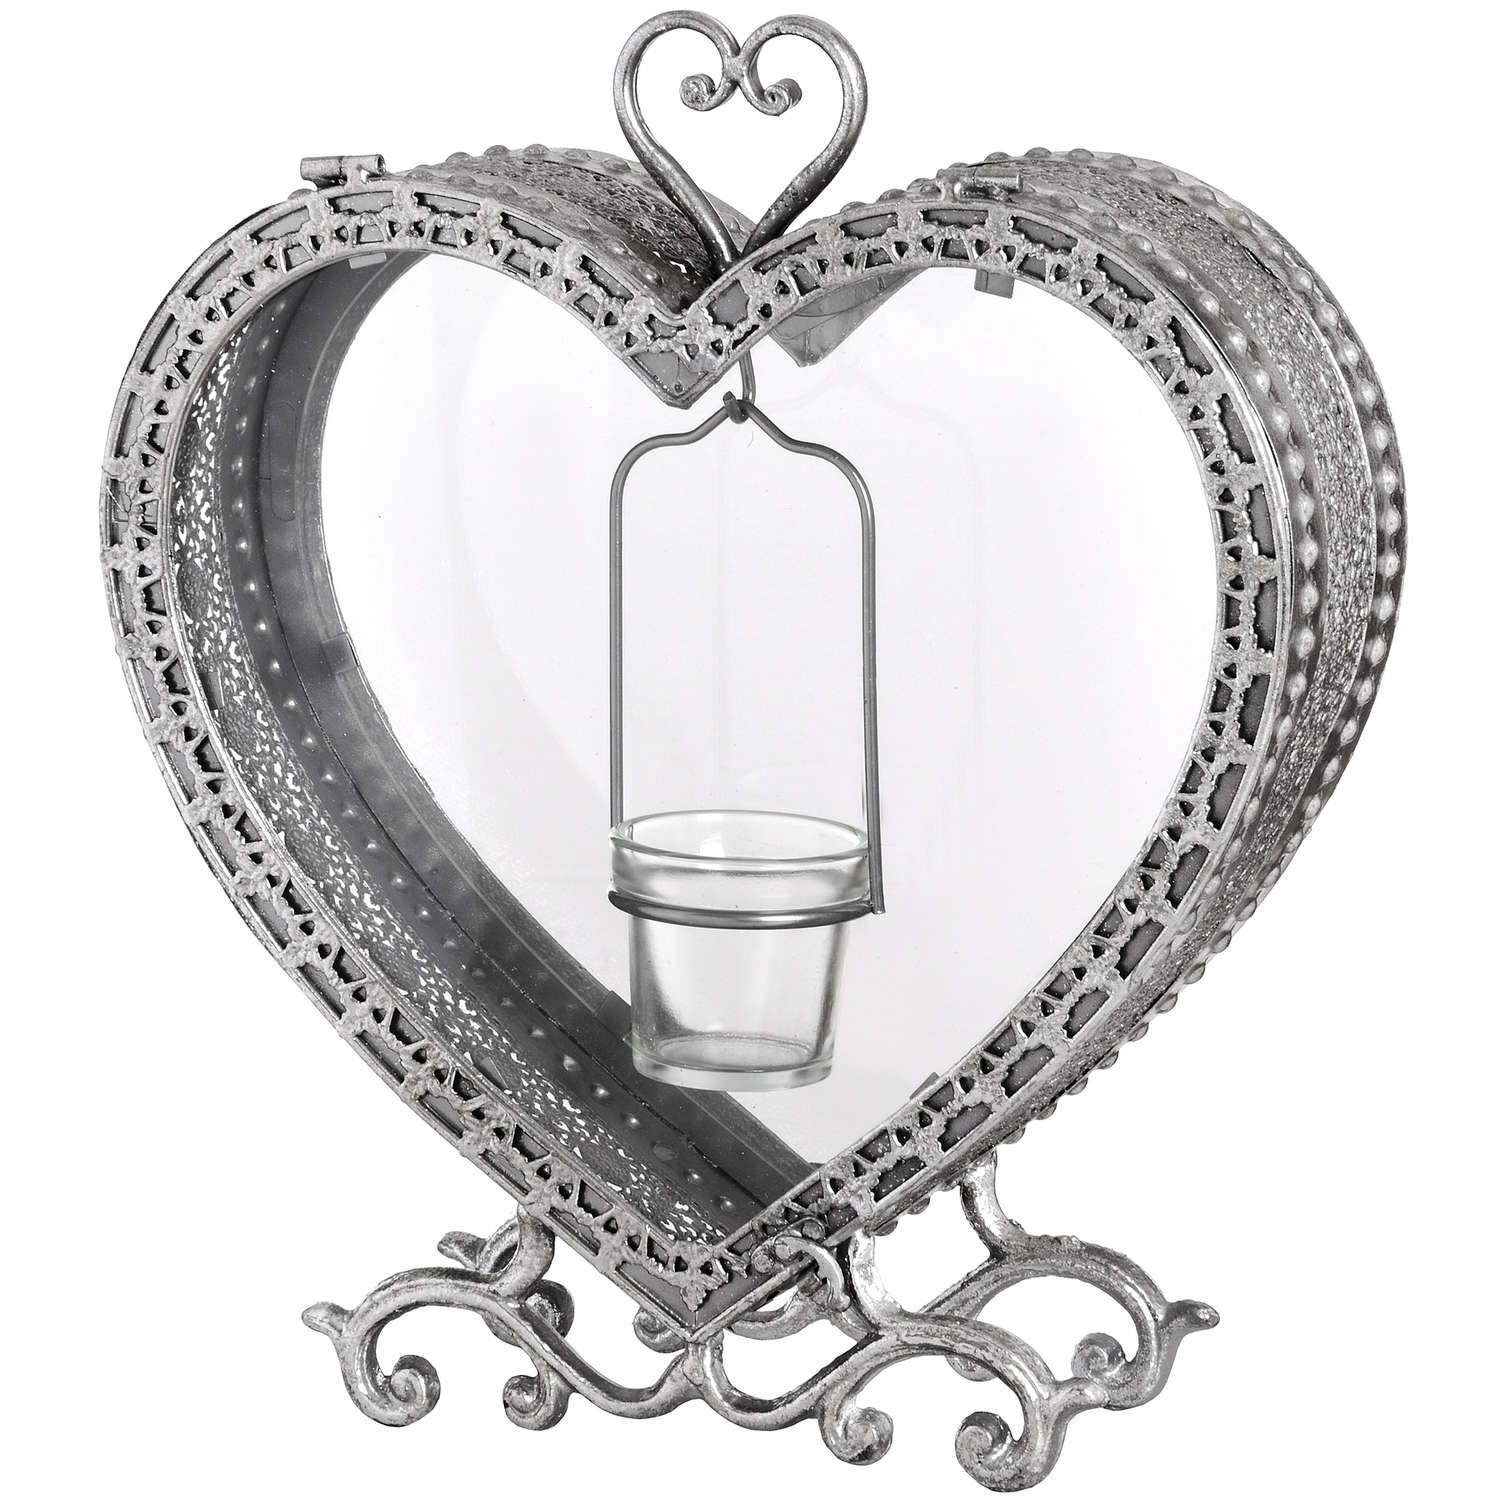 Free Standing Heart Tealight Lantern in Antique Silver - Image 1